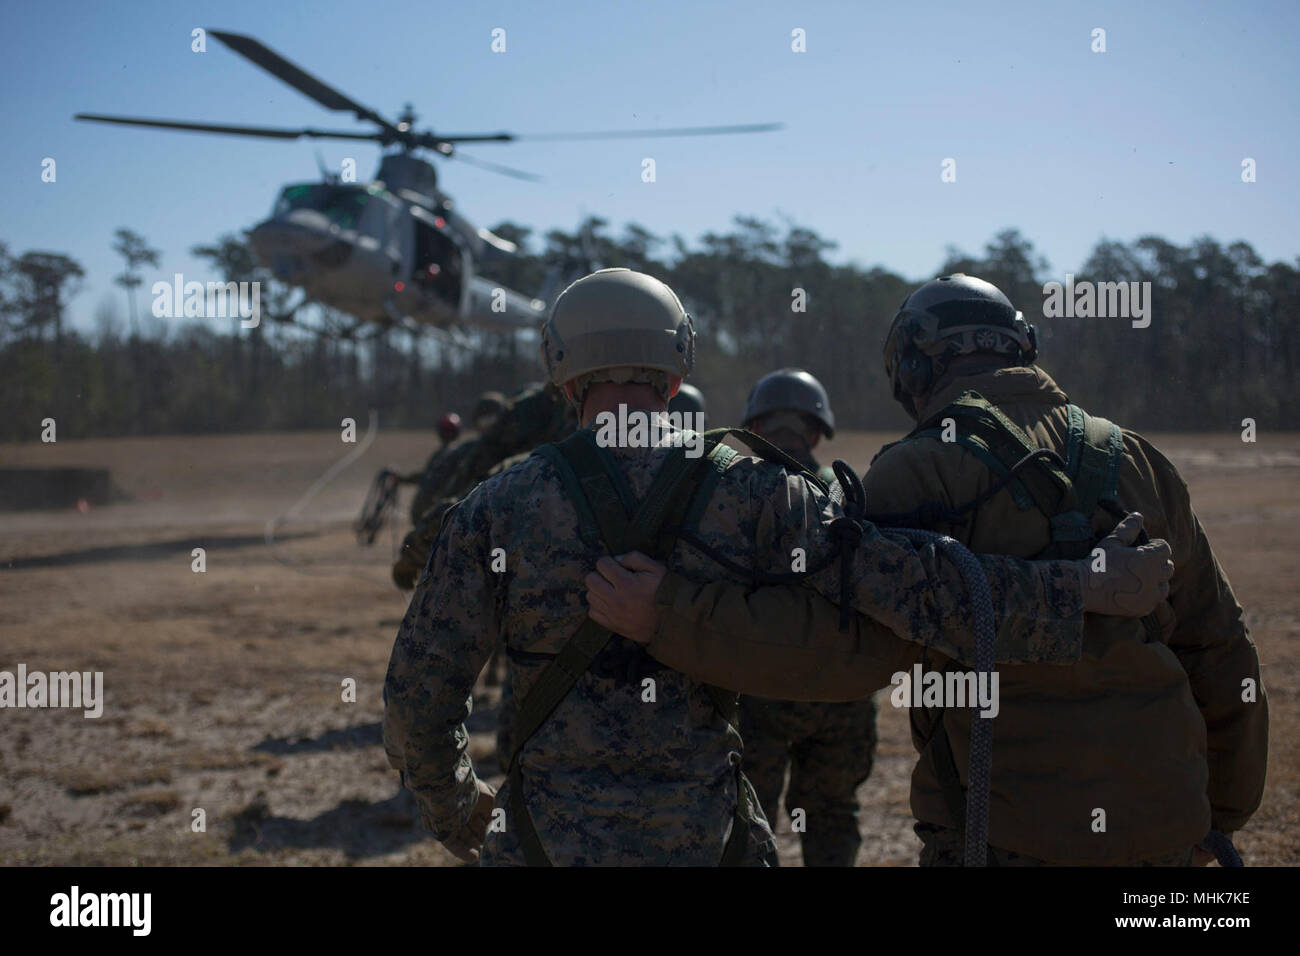 U.S. Marines with II Marine Expeditionary Force Information Group prepare to be lifted from the ground during special patrol insertion and extraction operations training at Camp Lejeune, N.C., March 23, 2018. The Marines conducted the training to improve operational capabilities and to recertify helicopter rope suspension techniques masters from across II MEF. (U.S. Marine Corps Stock Photo